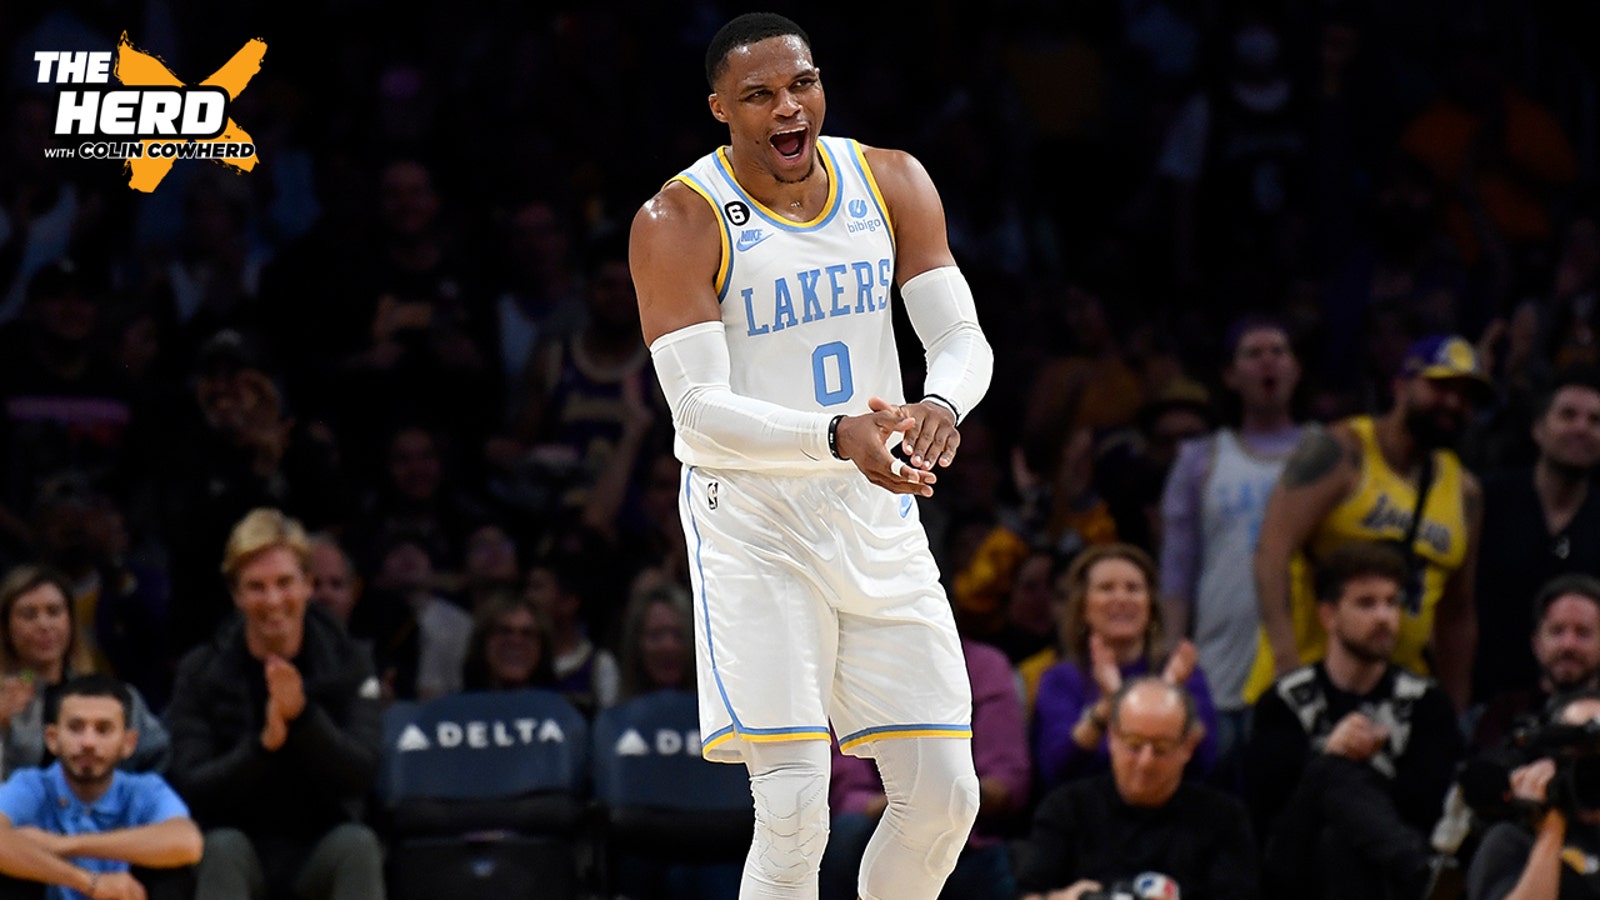 Lakers win second straight with Russell Westbrook off bench